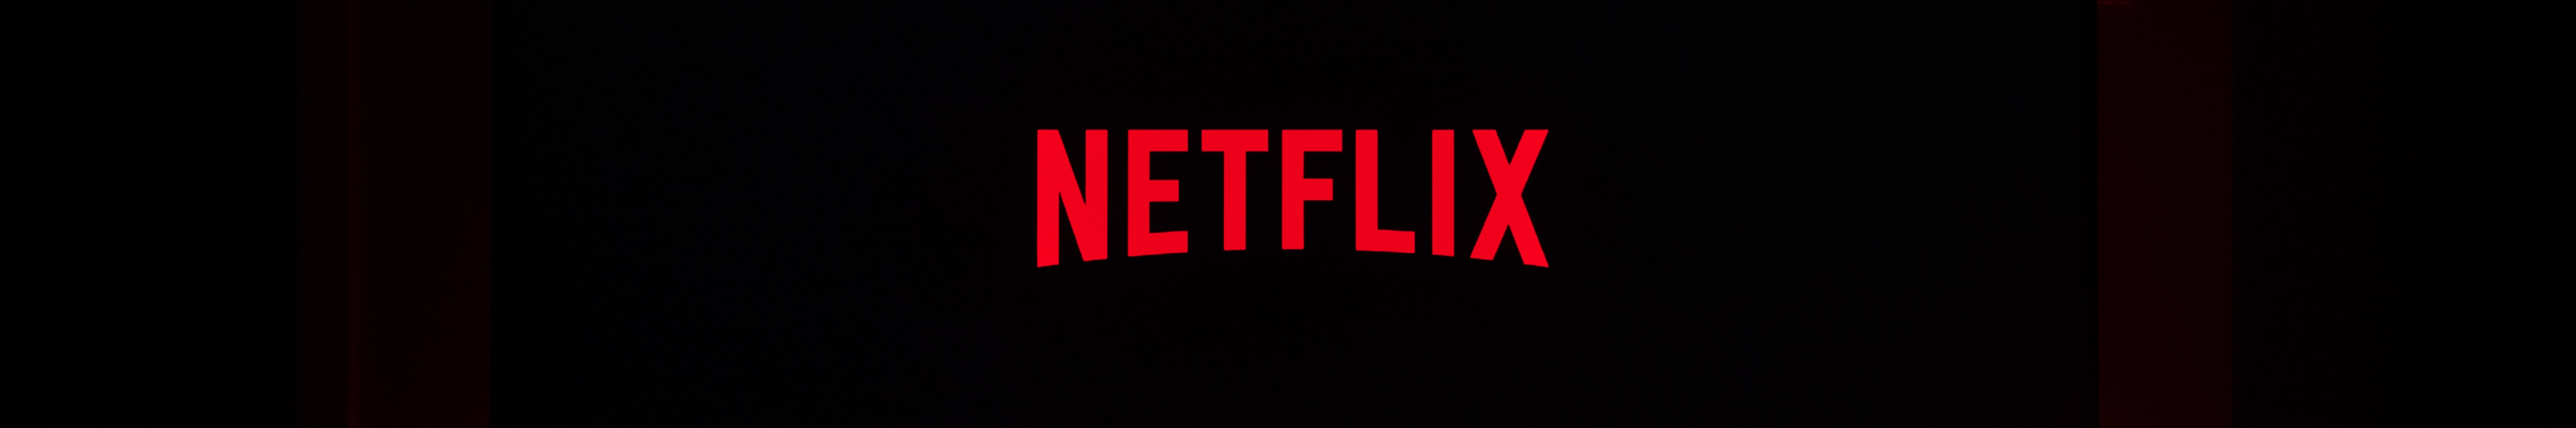 Netflix emitted 1 million tonnes of CO2 equivalent in 2020